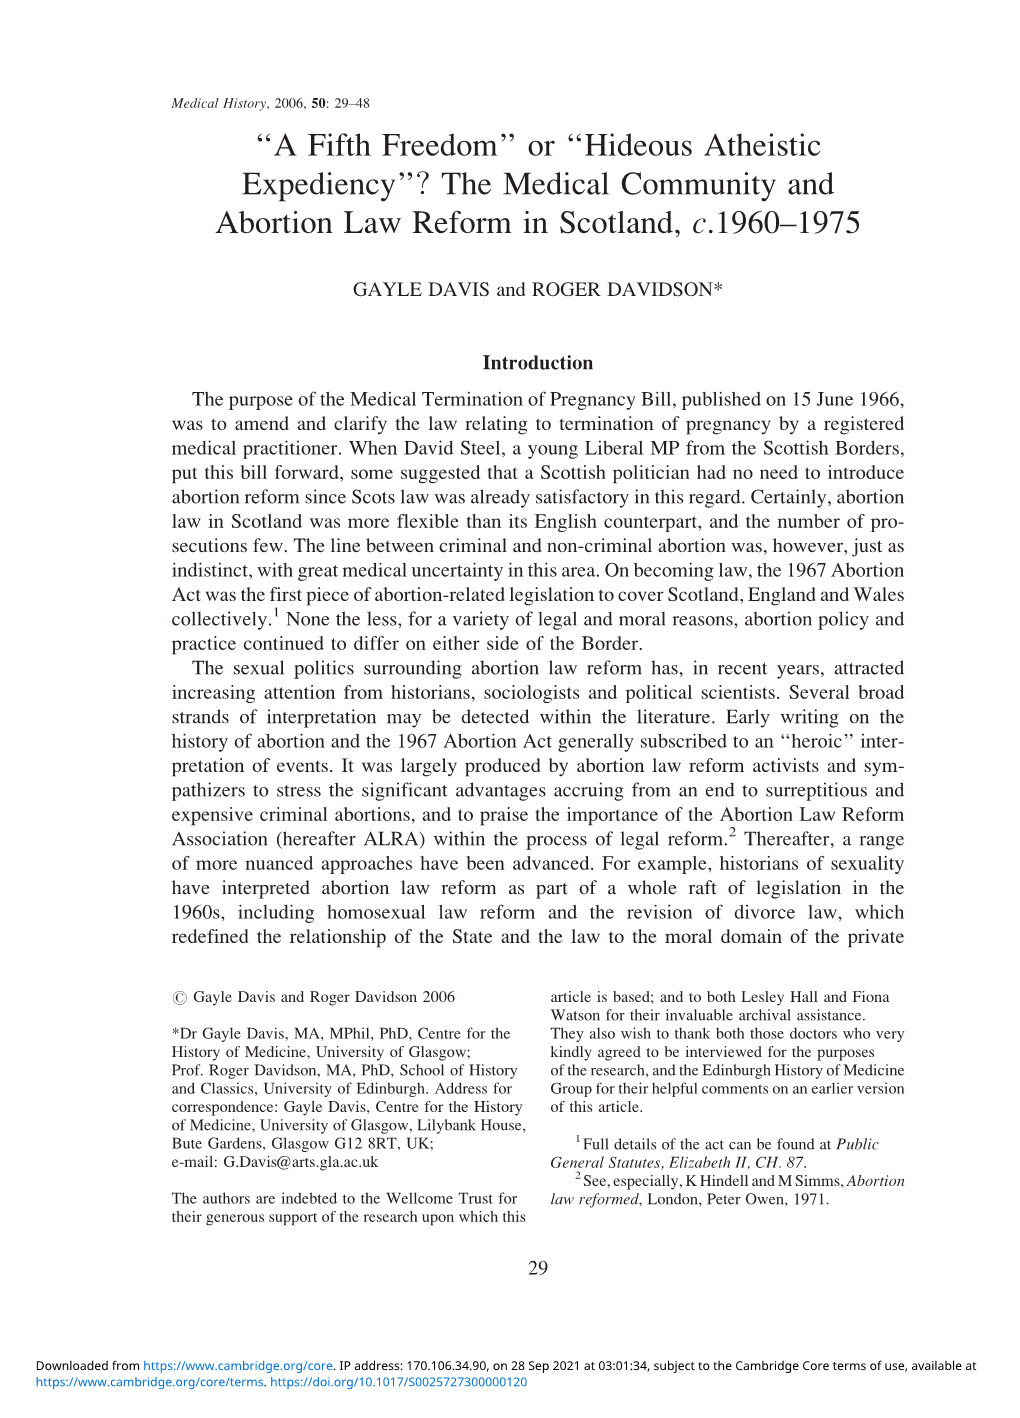 The Medical Community and Abortion Law Reform in Scotland, C.1960–1975